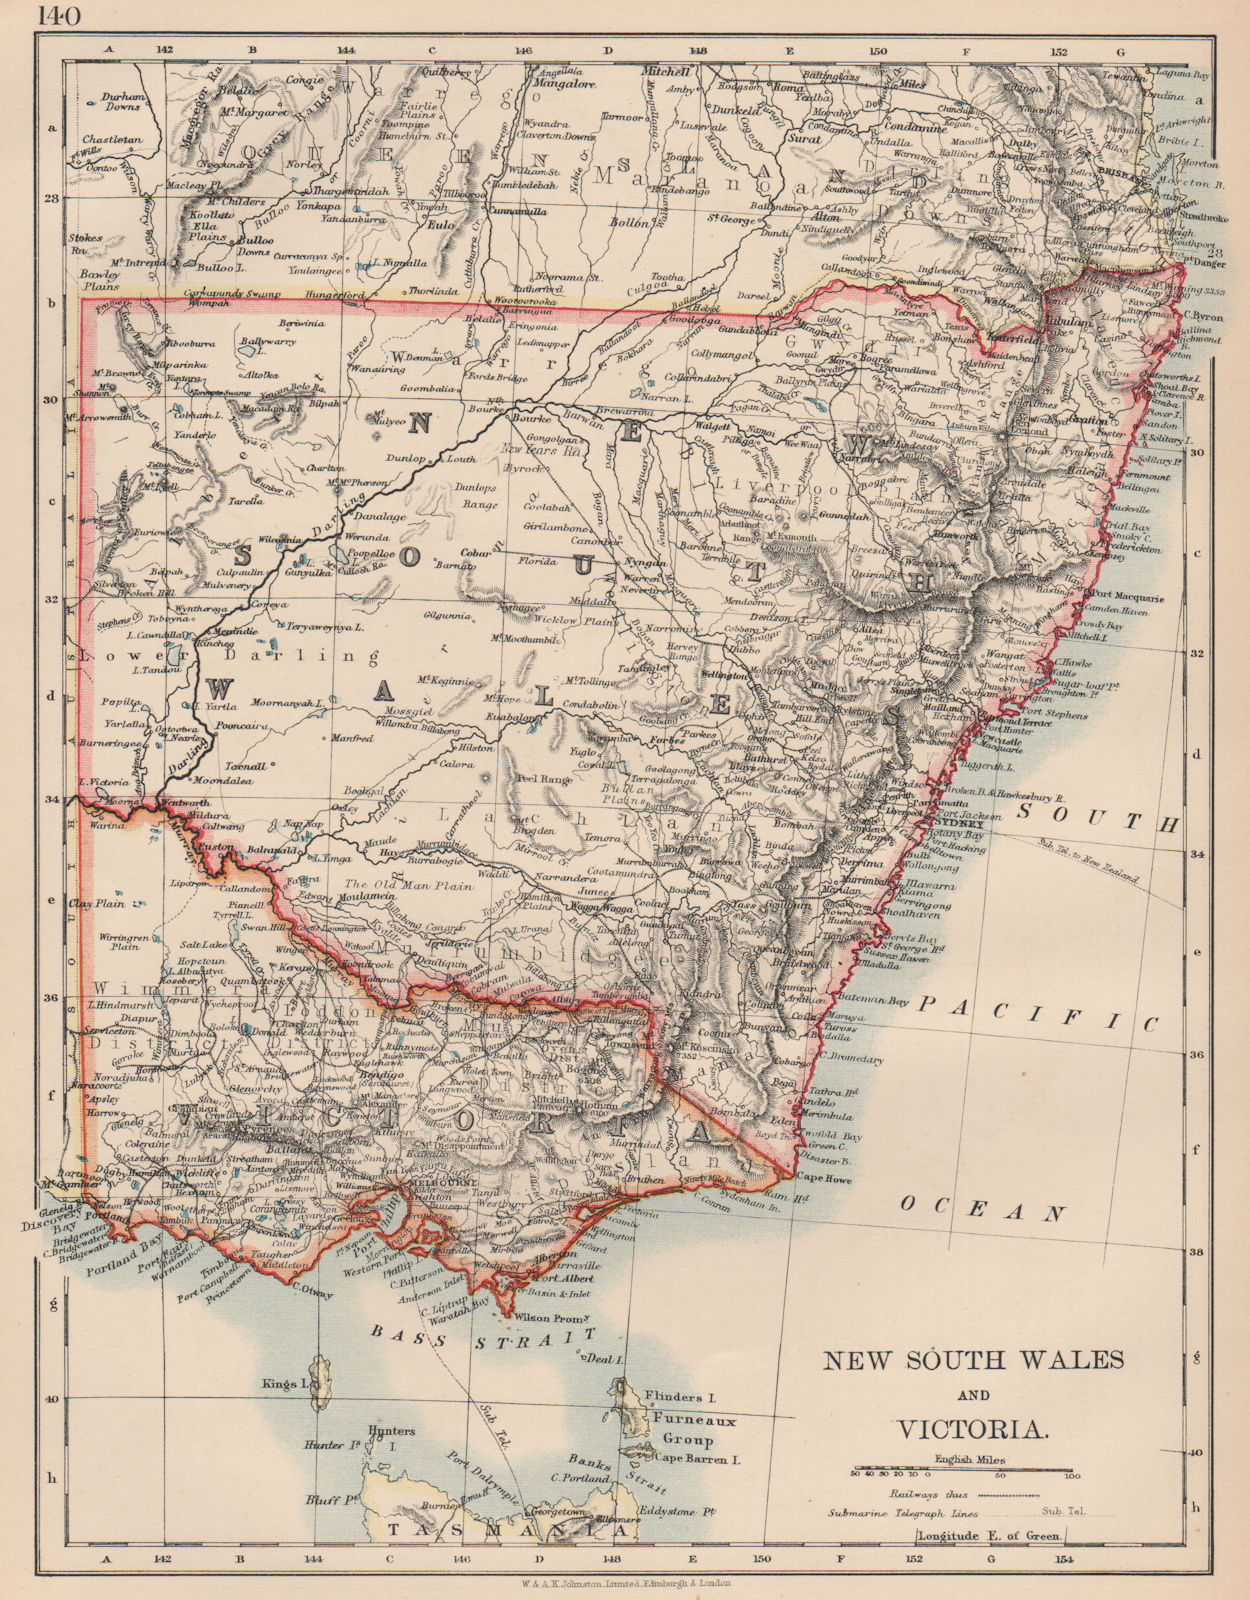 NEW SOUTH WALES & VICTORIA. Shows railways Telegraph cables. Australia 1906 map